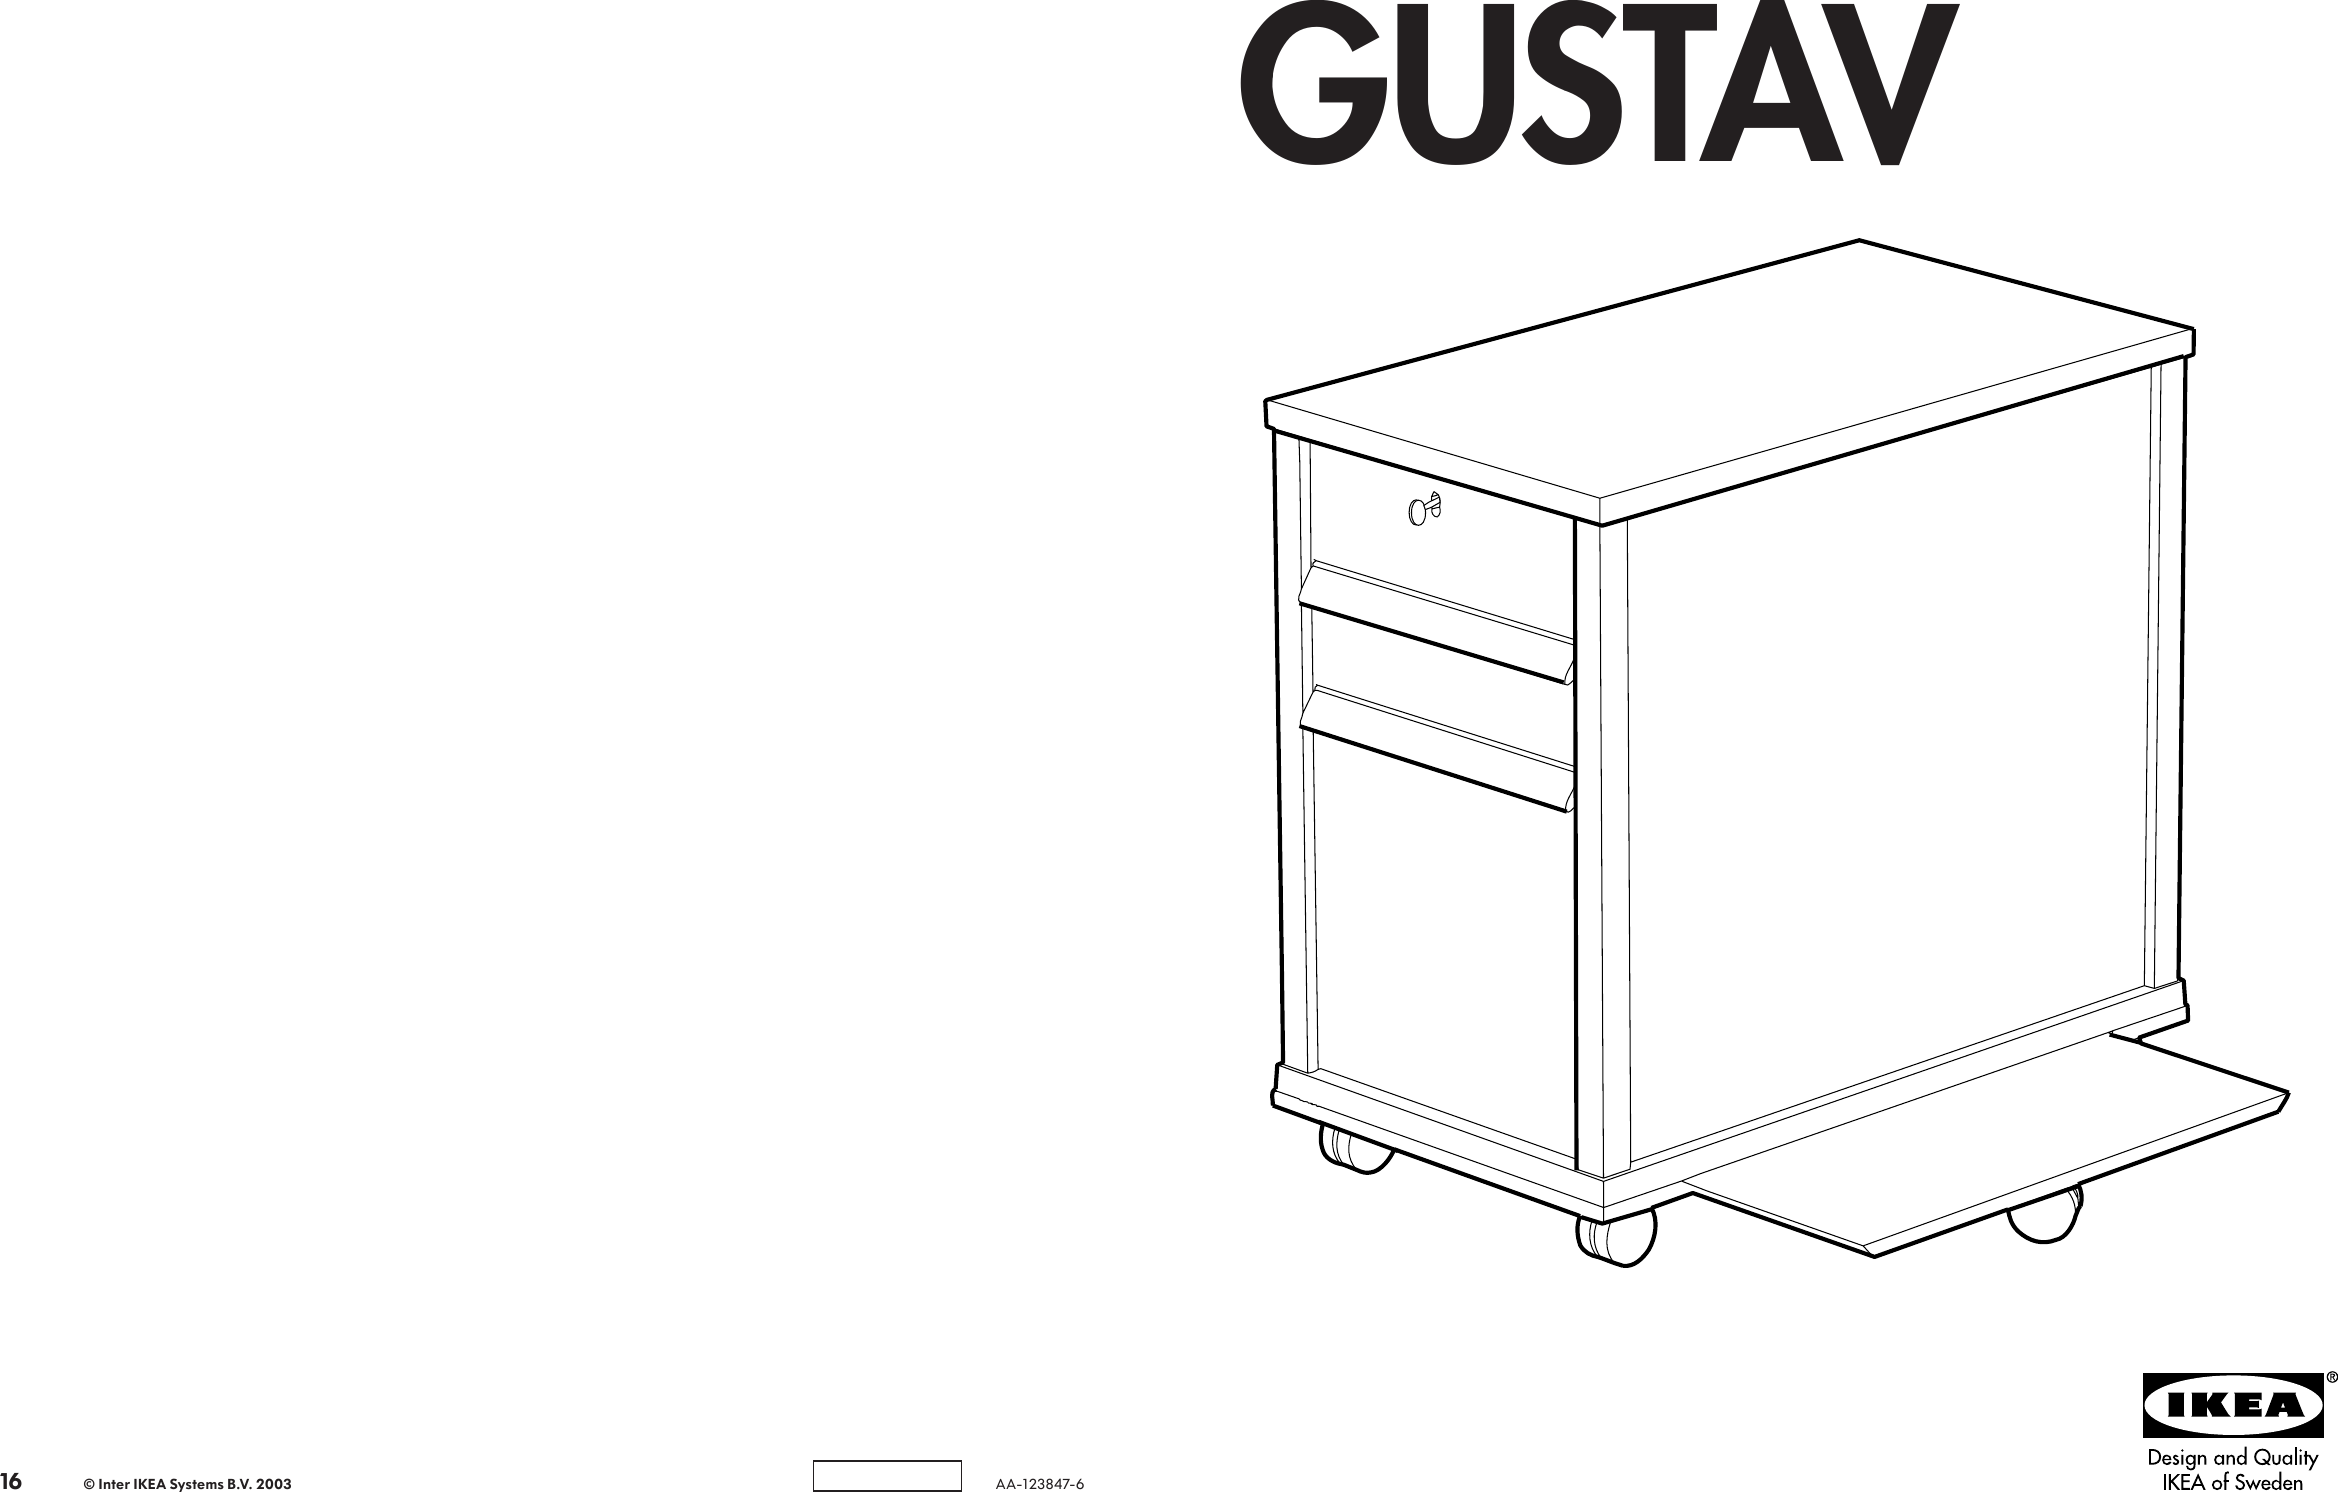 Page 1 of 8 - Ikea Ikea-Gustav-Drawer-Unit-Casters-14X24-Assembly-Instruction